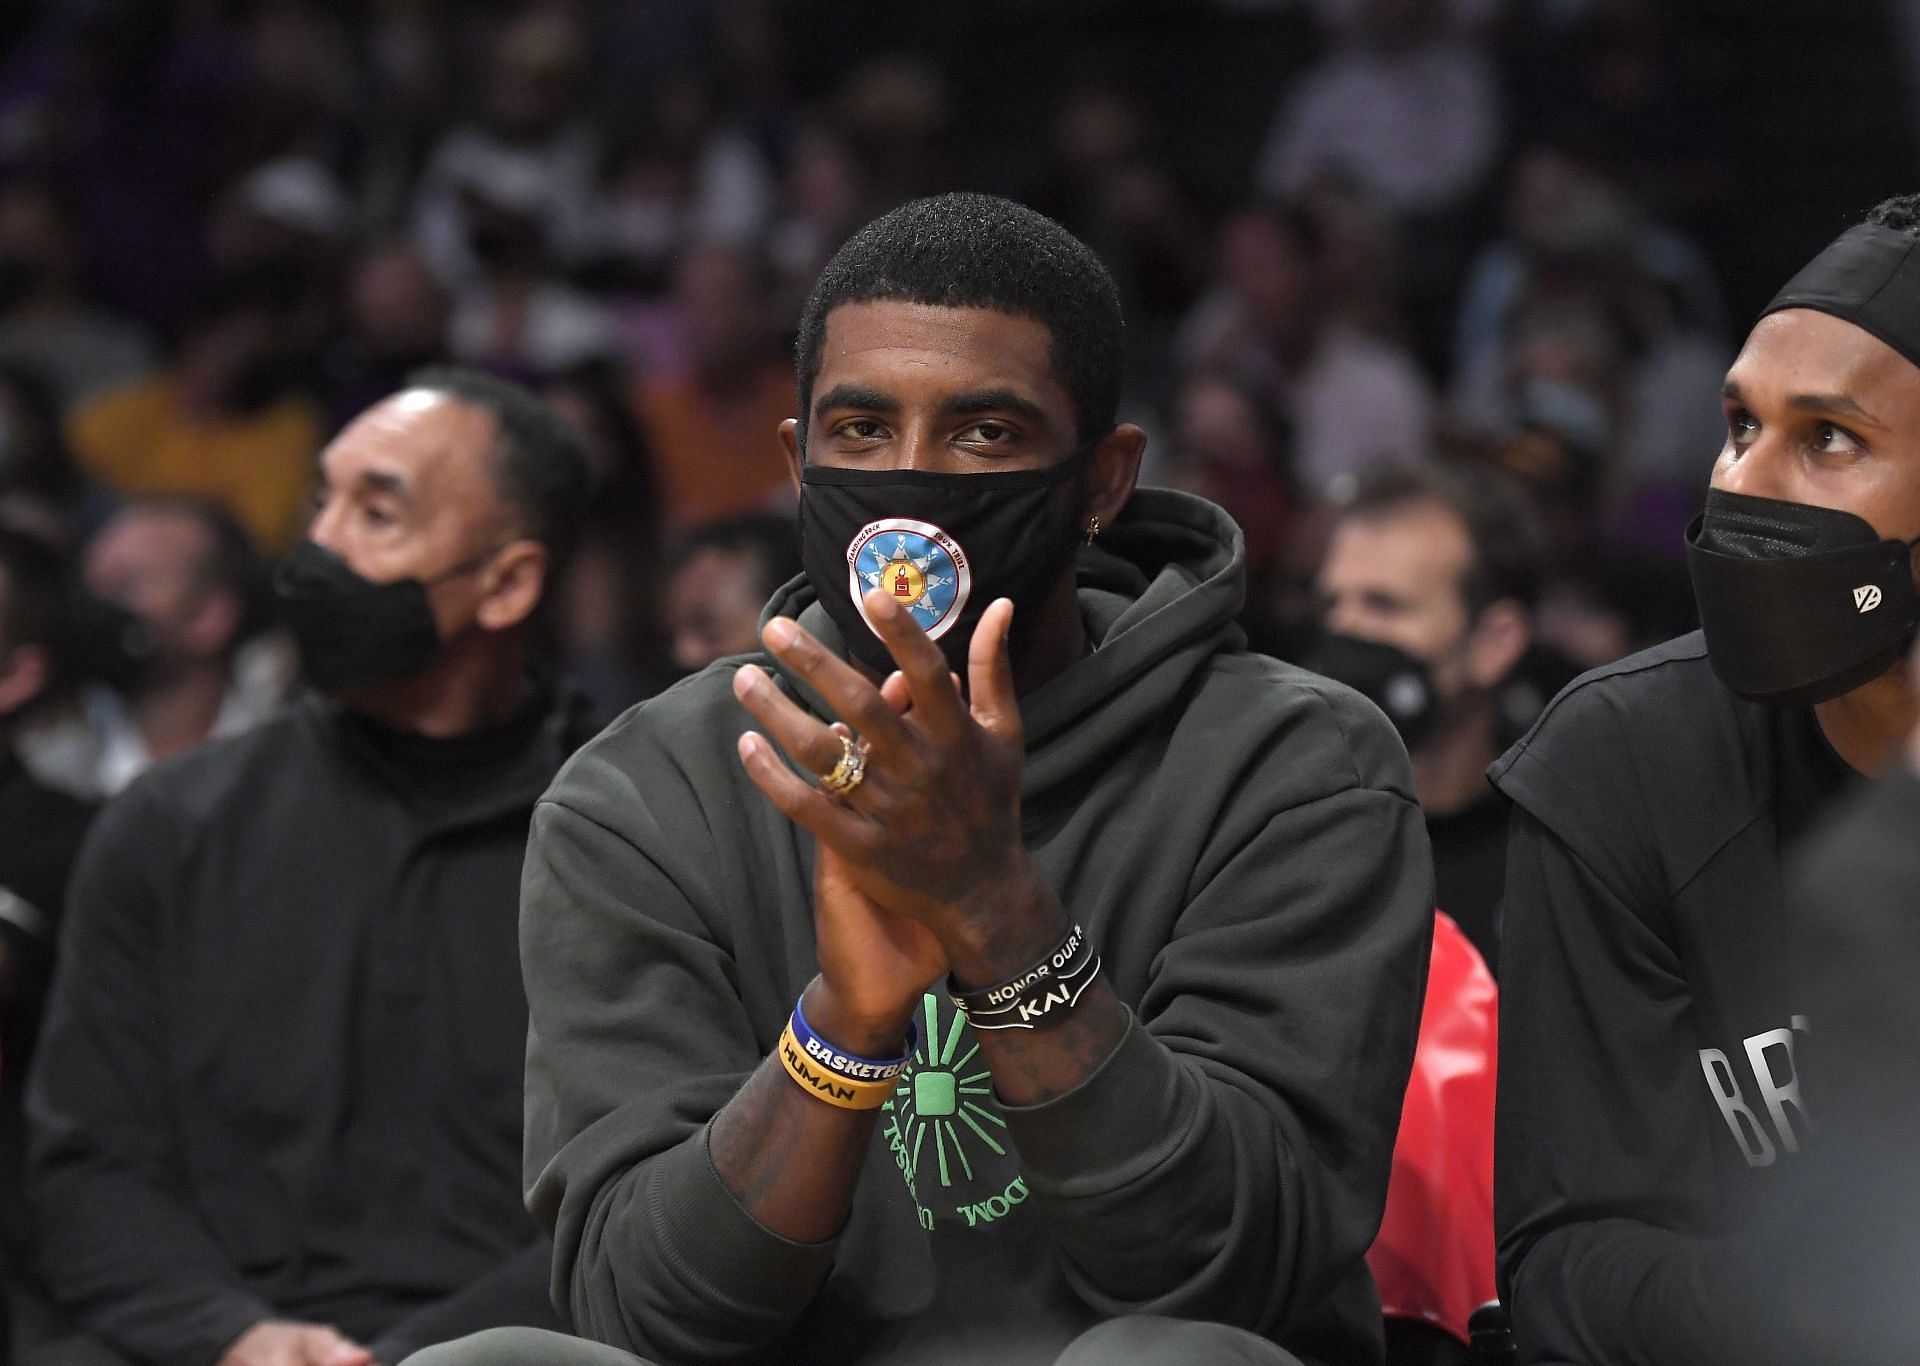 Kyrie Irving of the Brooklyn Nets on the bench